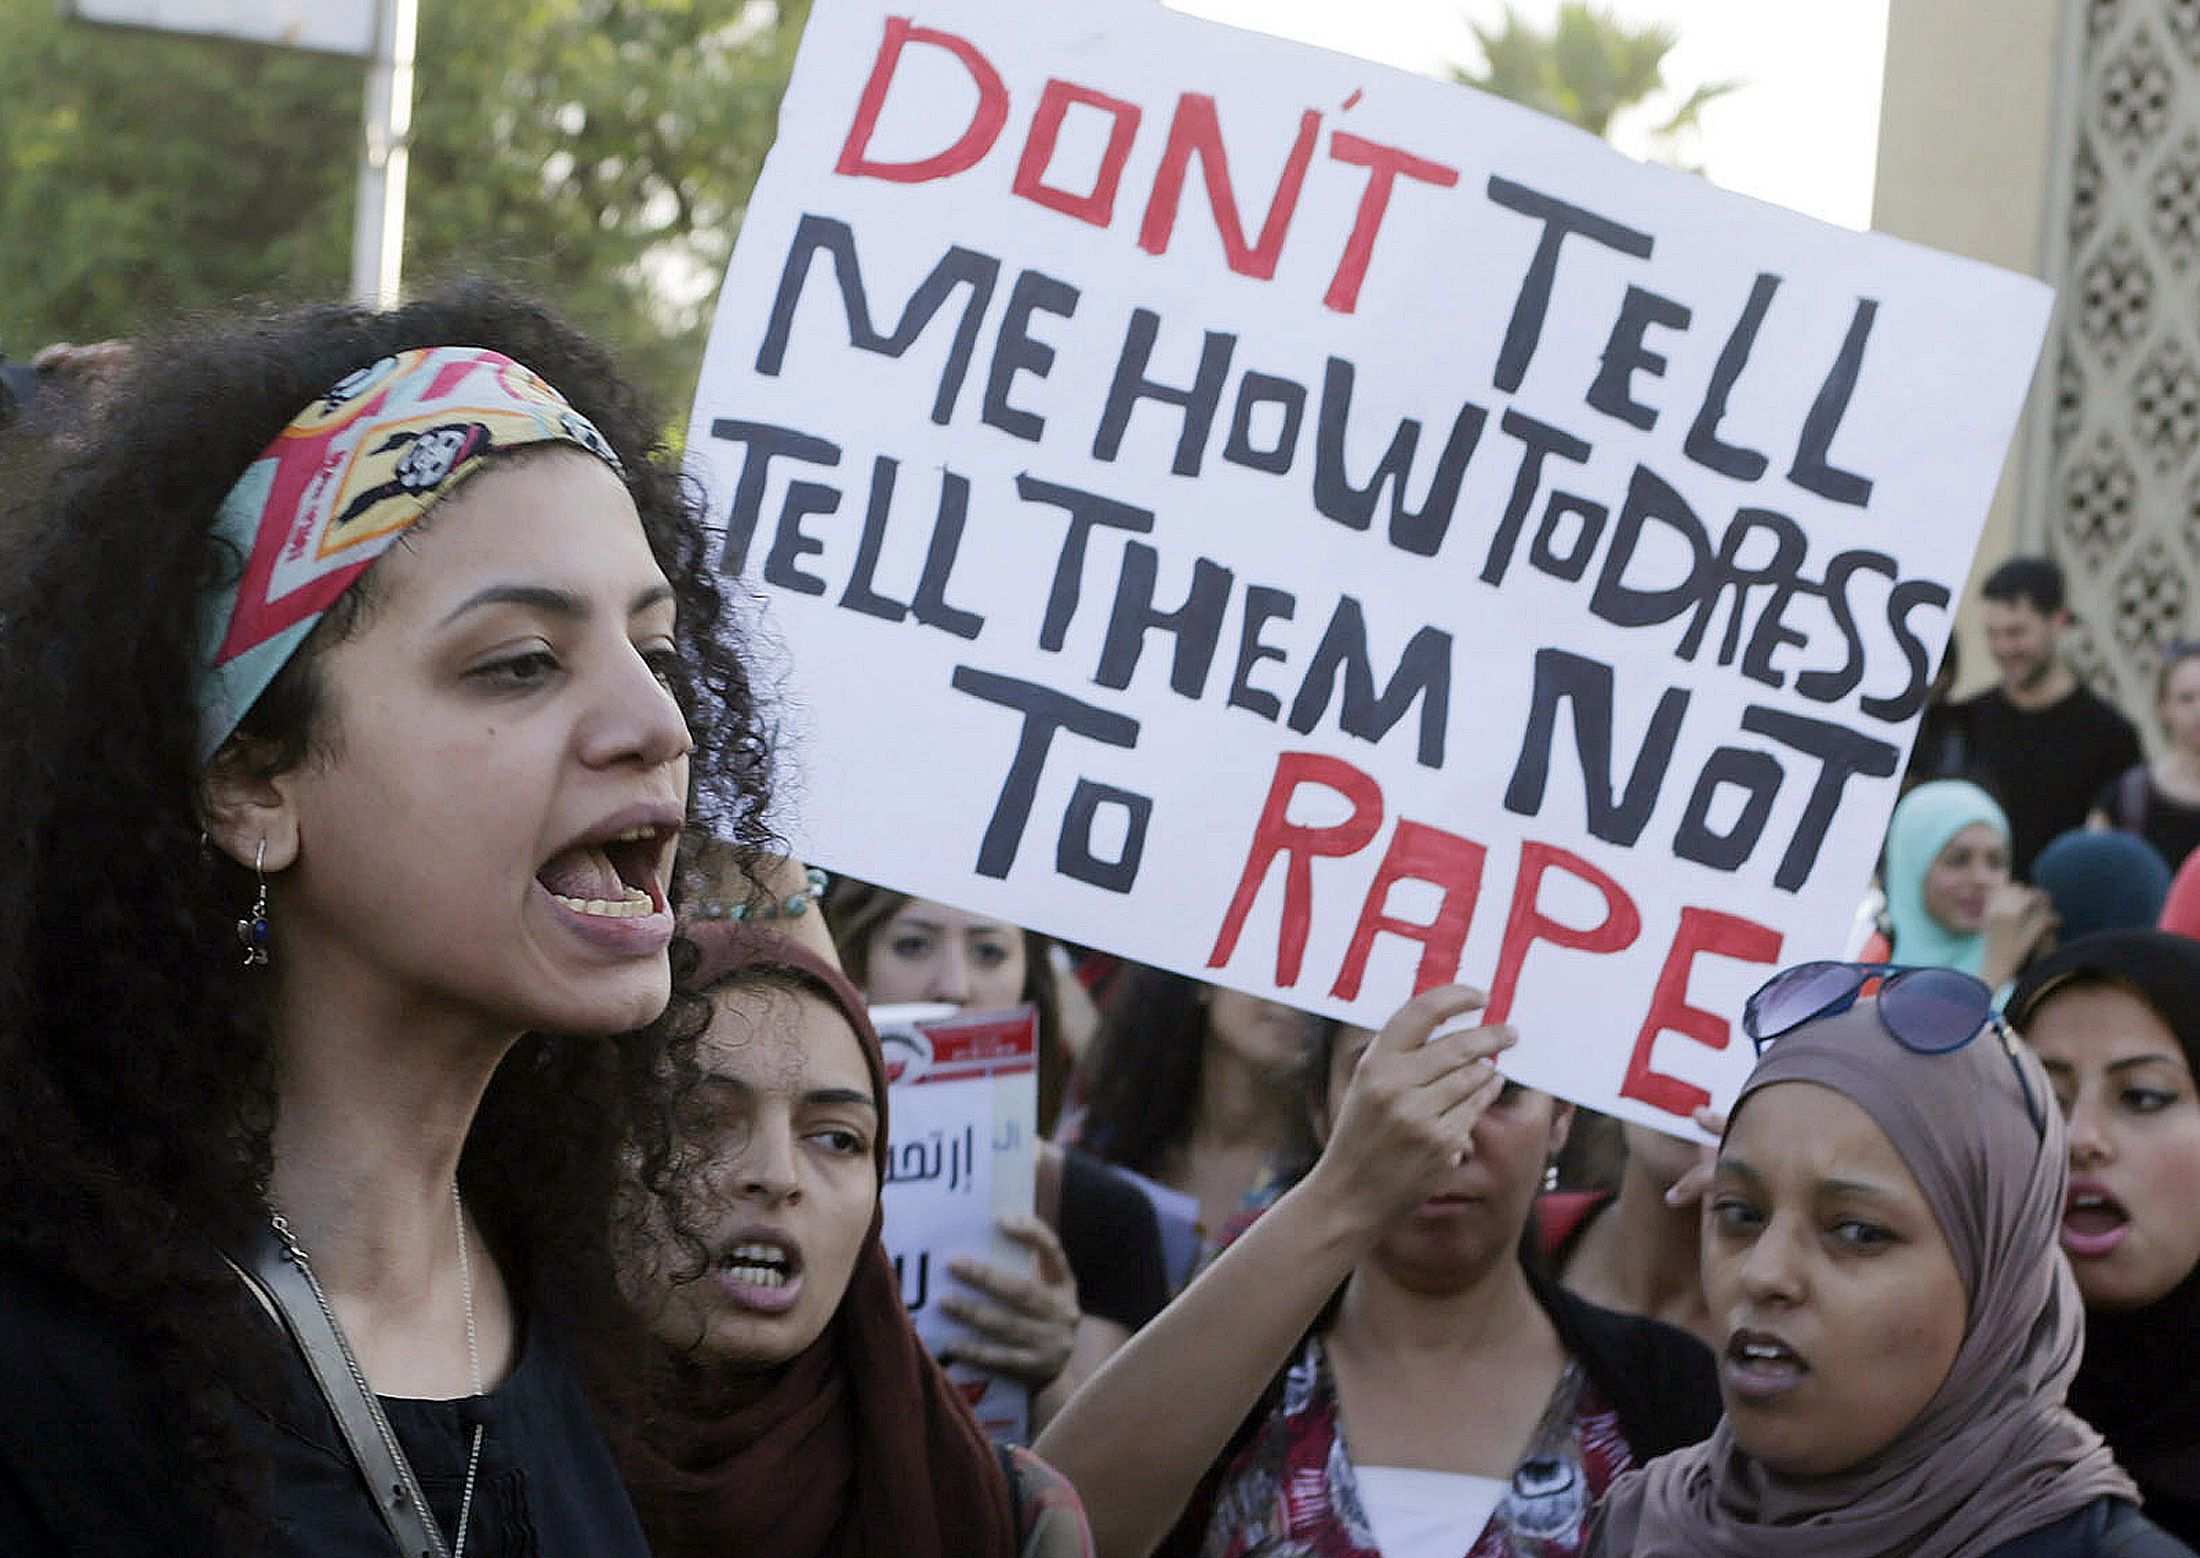 Egyptian Court Sentences 7 To Life In Prison For Sexual Assaults In Tahrir Square